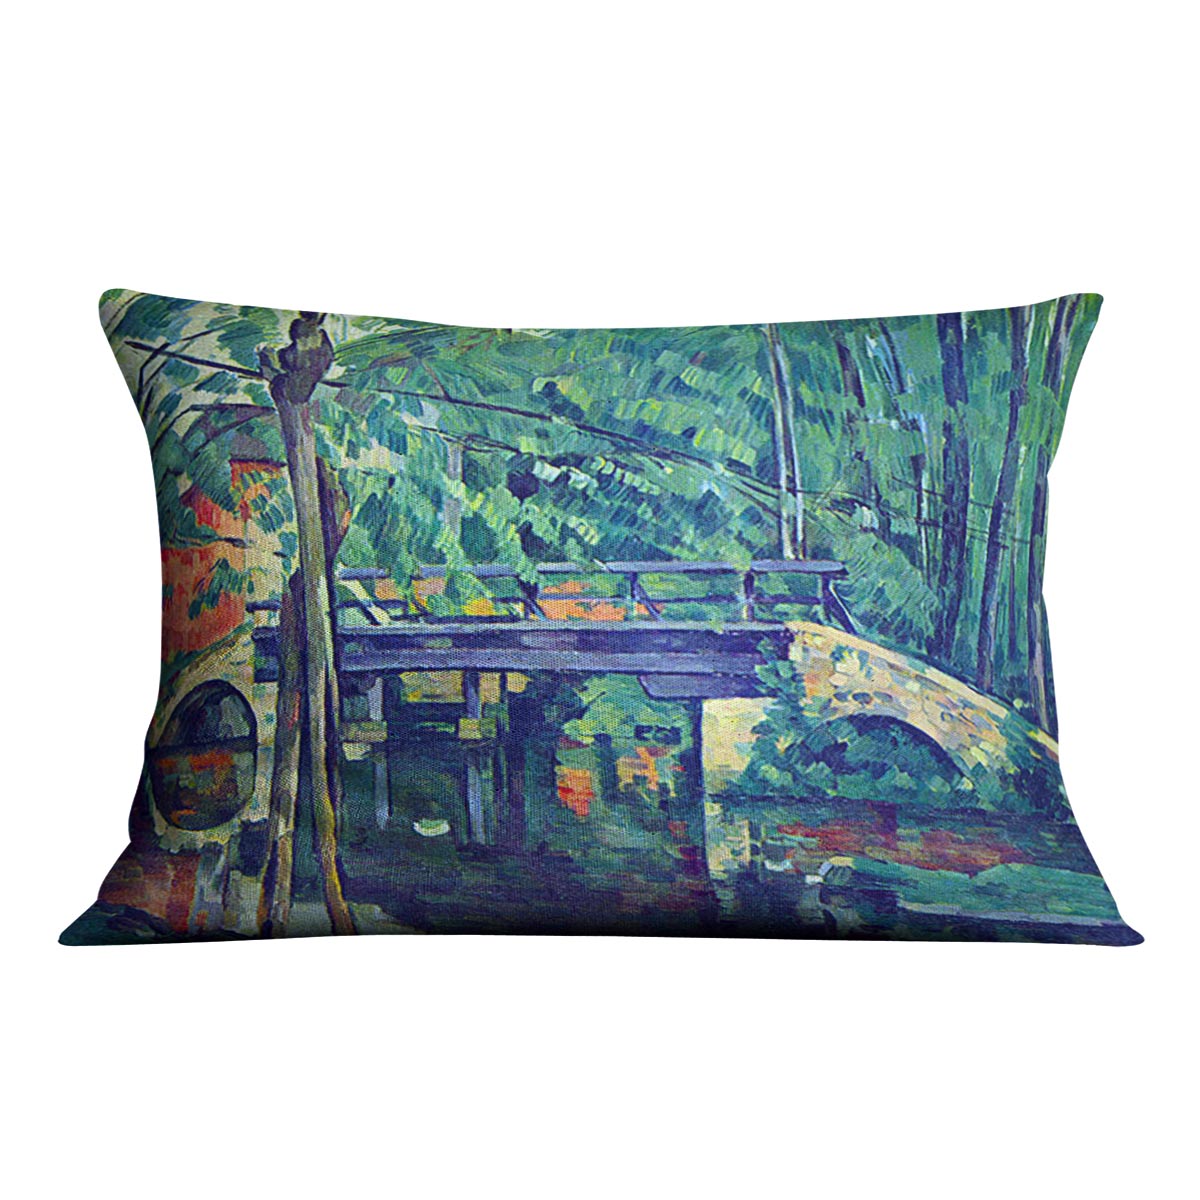 Bridge in the forest by Cezanne Cushion